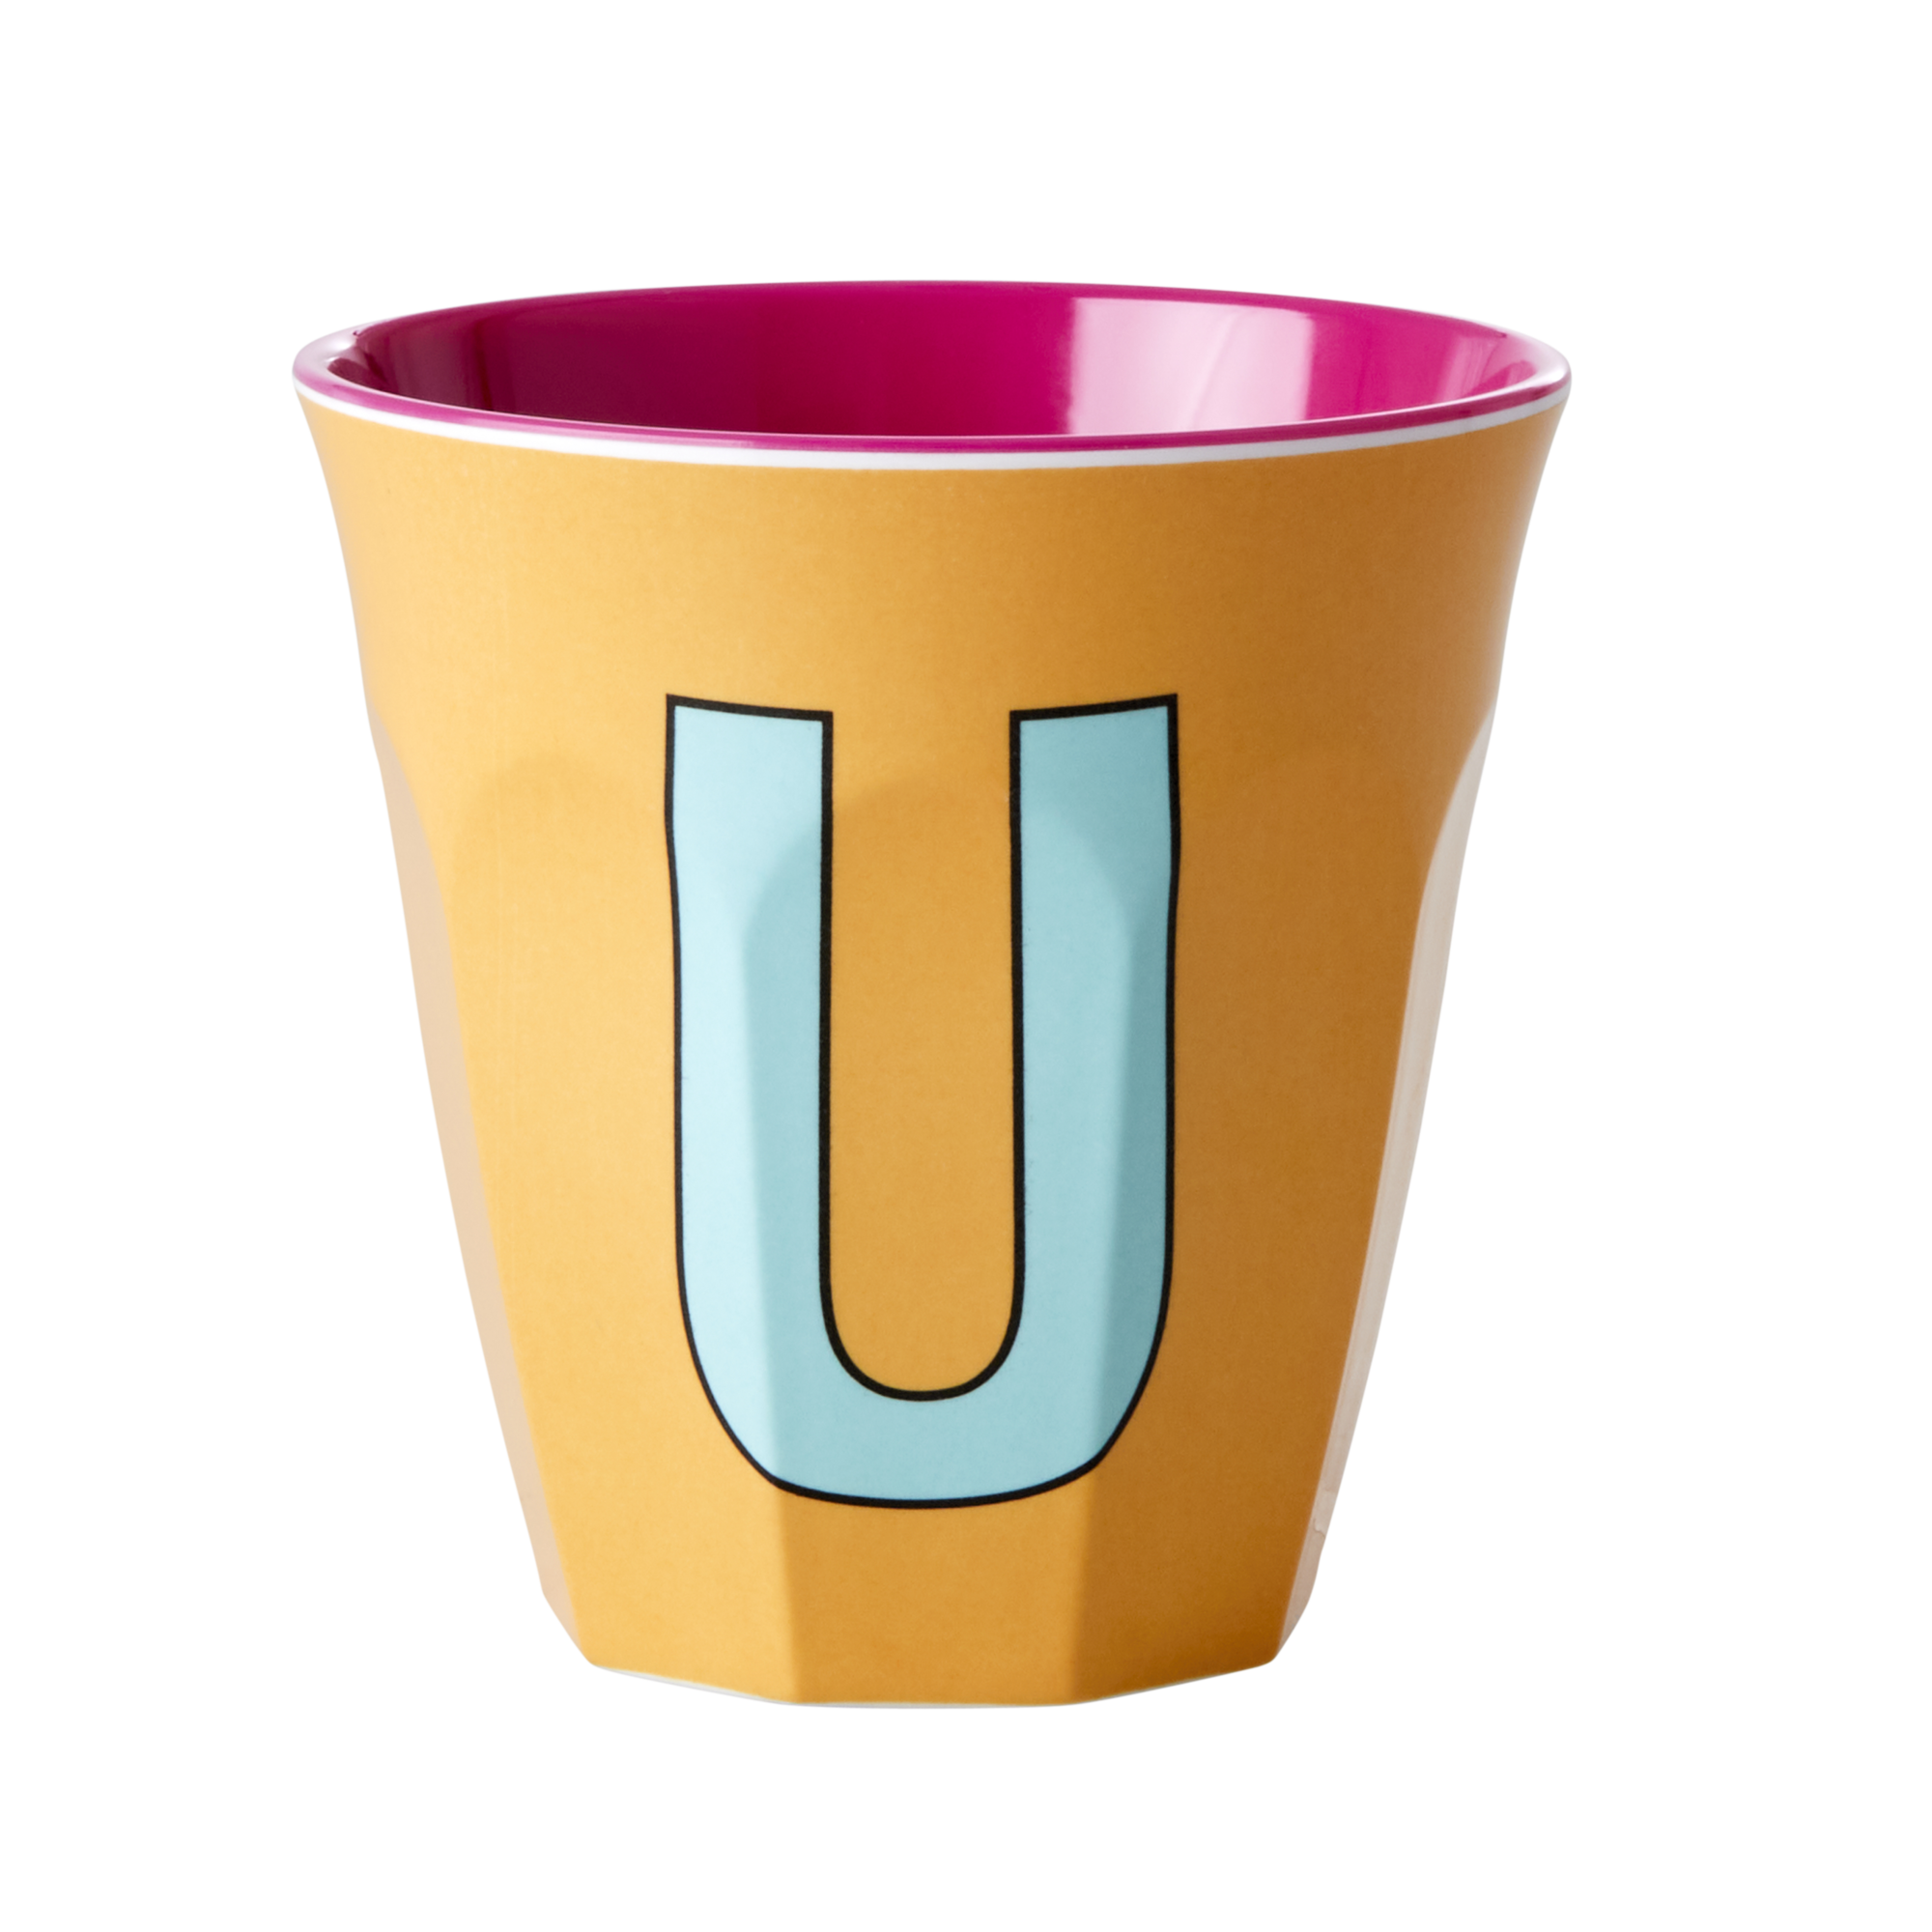 Melamine cup by Rice by Rice in the colors yellow, aqua and pink with the letter "U"